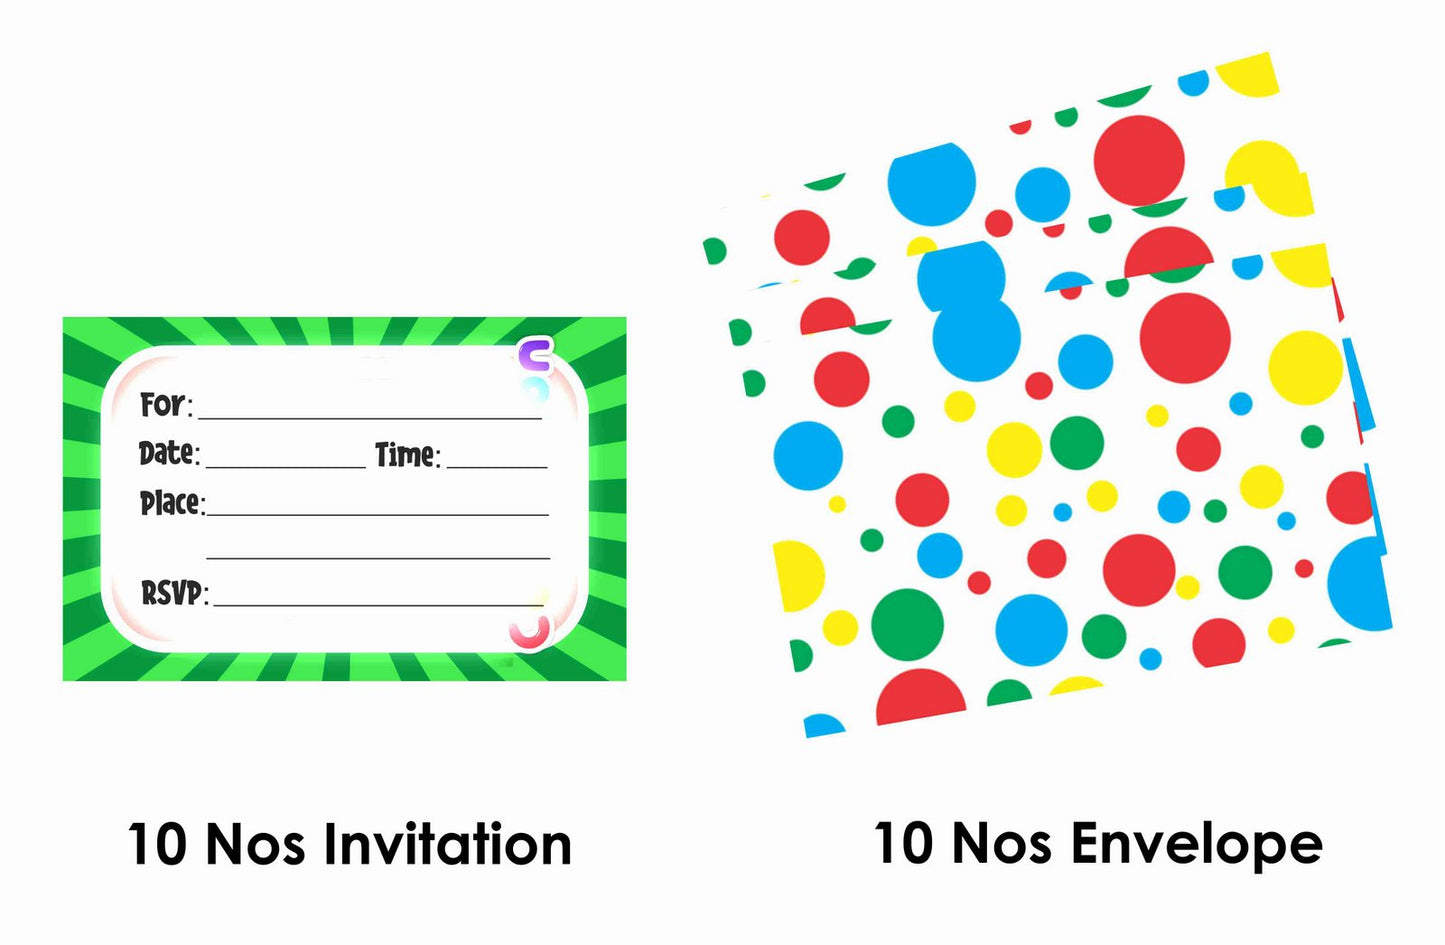 Cocomelon Theme Children's Birthday Party Invitations Cards with Envelopes - Kids Birthday Party Invitations for Boys or Girls,- Invitation Cards (Pack of 10)